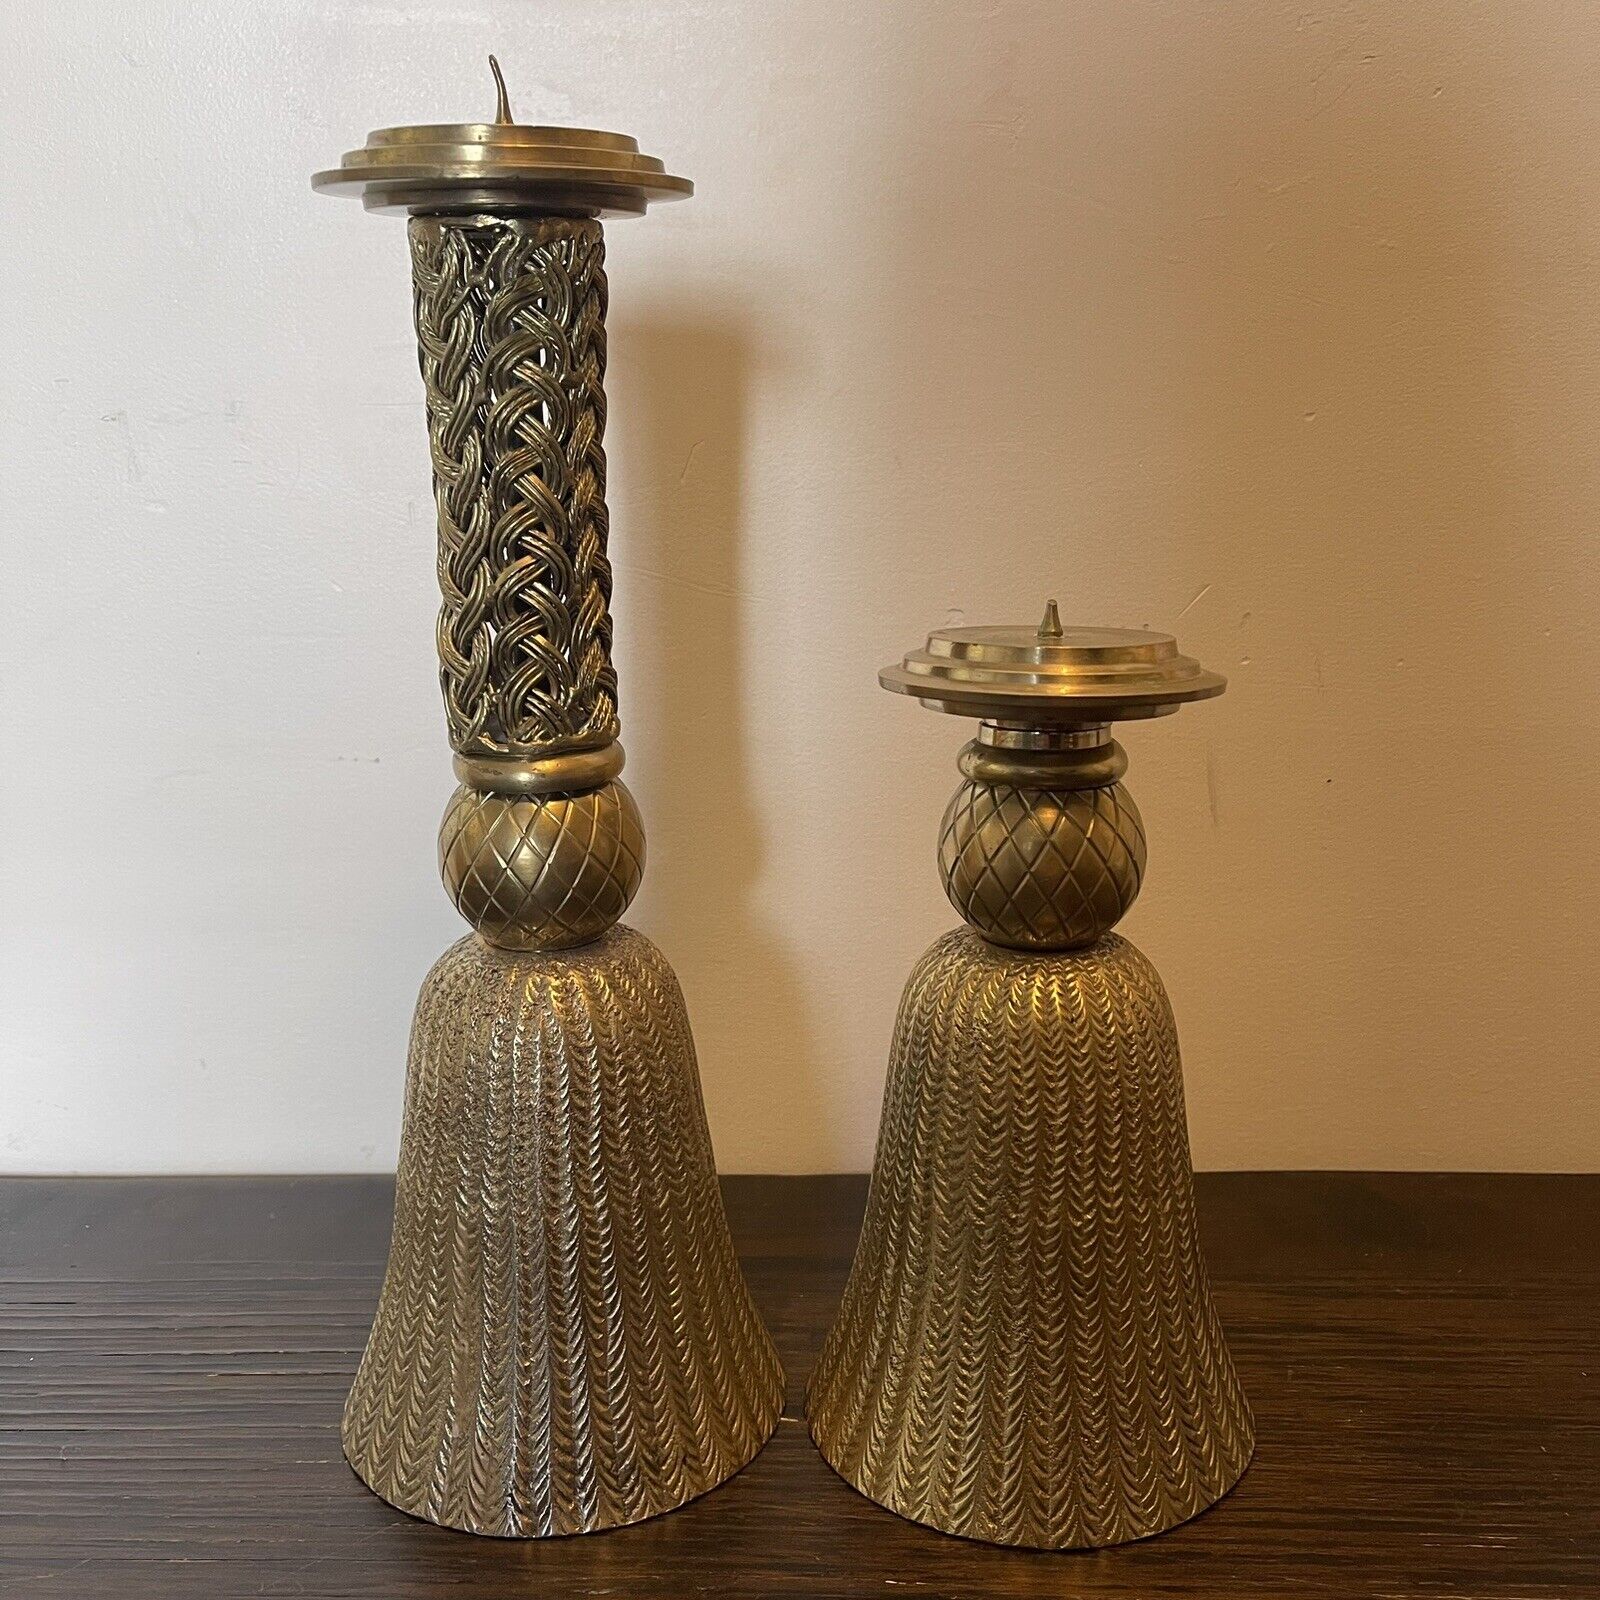 FINE TWO ANTIQUE BRASS CANDLESTICK CANDLE HOLDERS